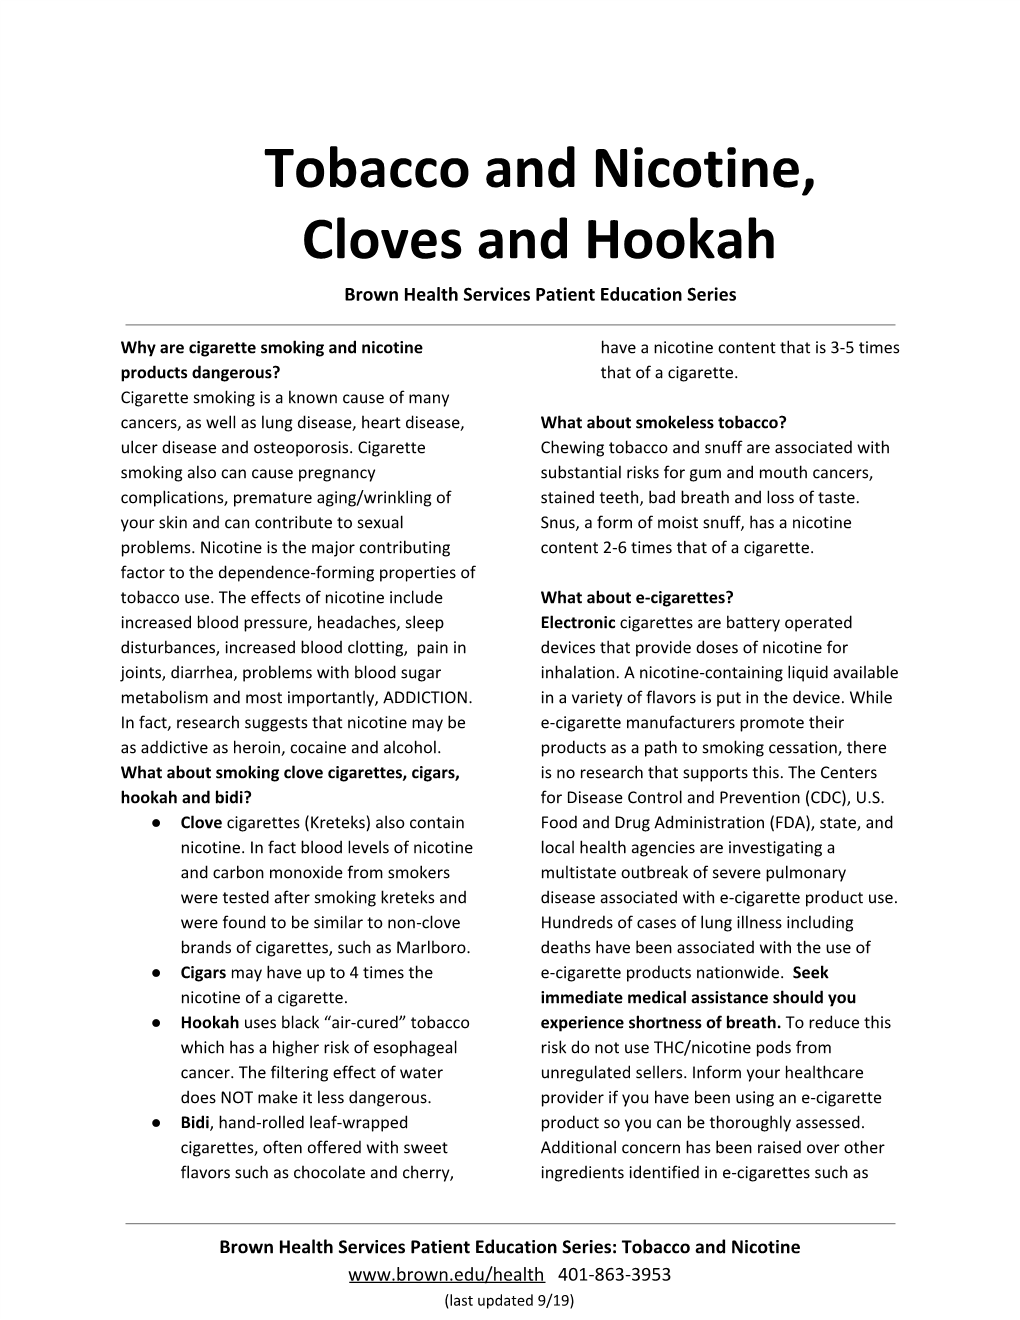 Tobacco and Nicotine, Cloves and Hookah Brown Health Services Patient Education Series